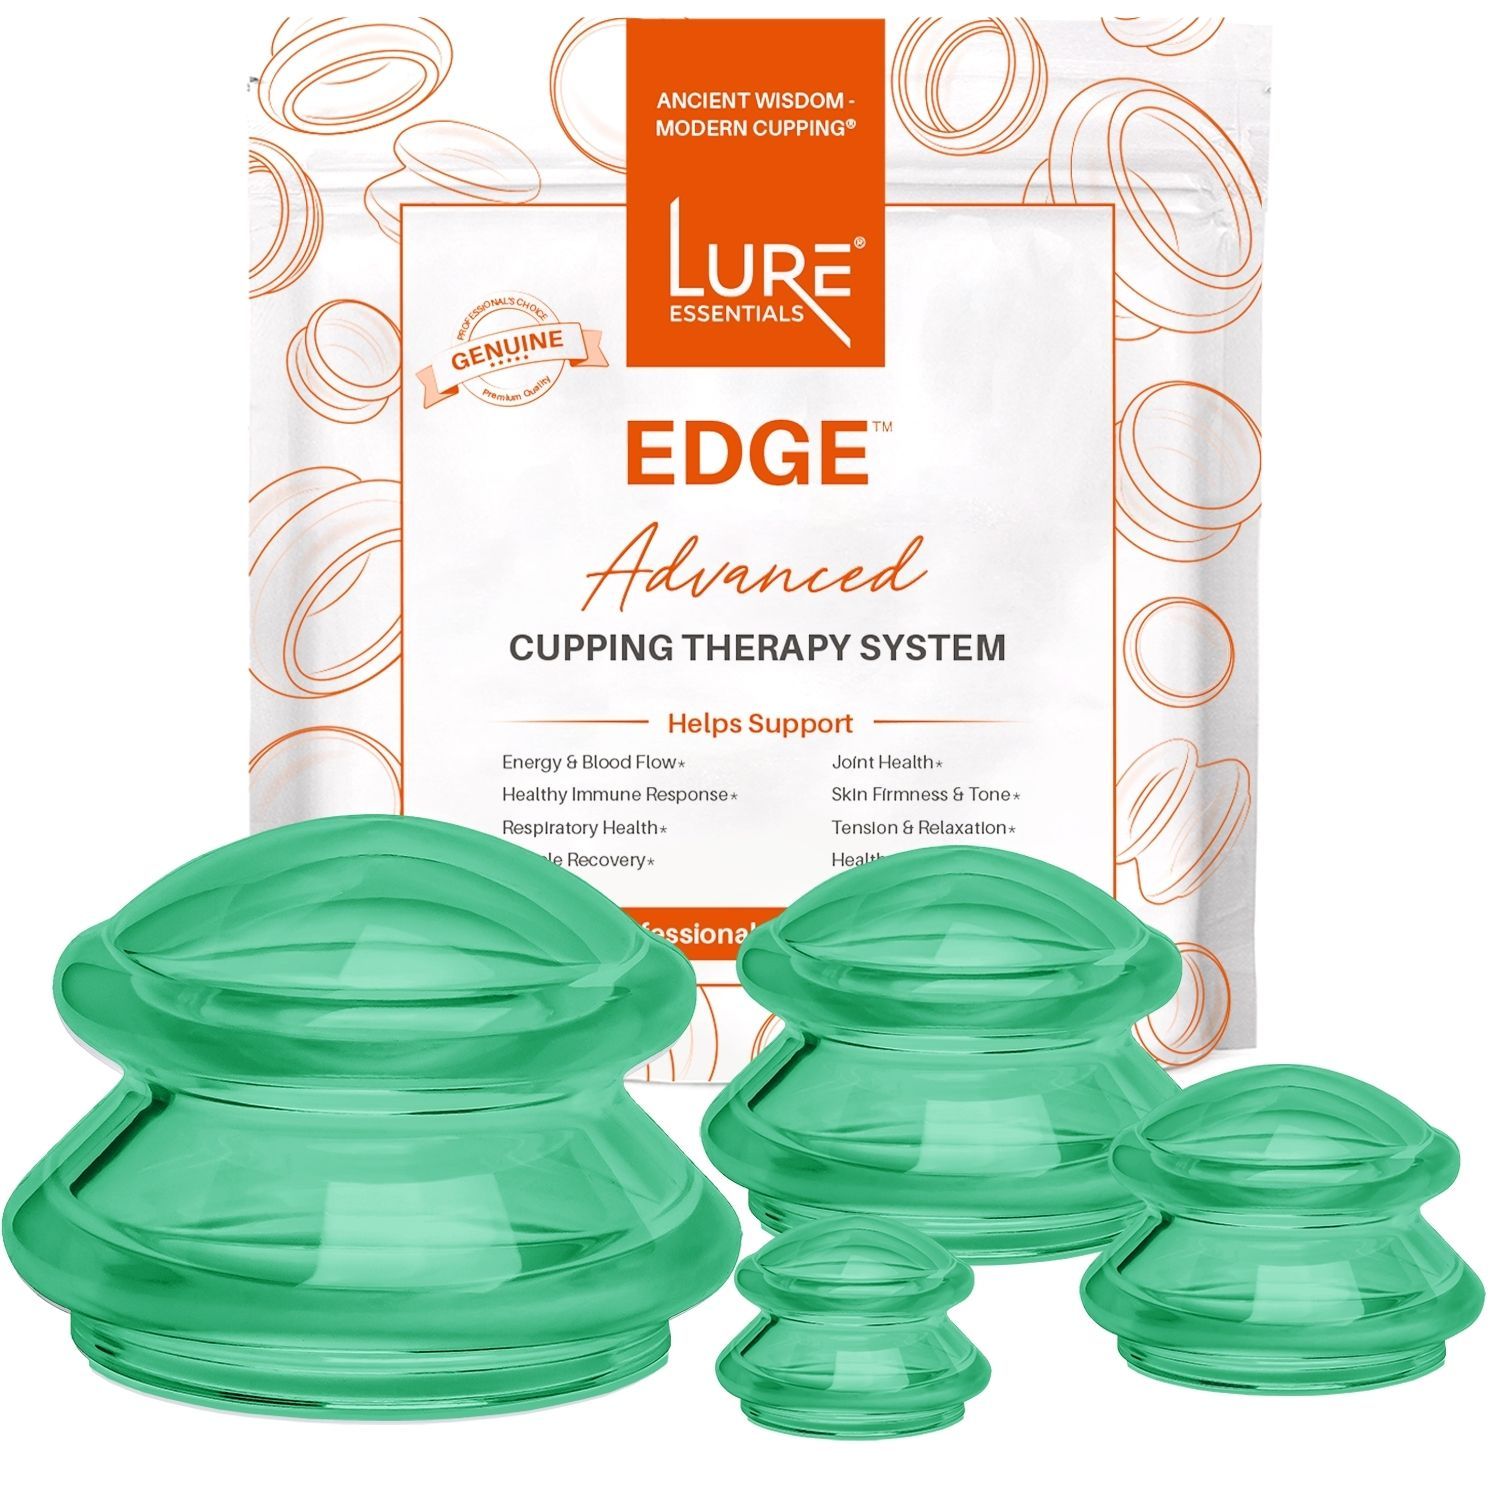 Ionic Energy Cupping Set (10 cups) – Earth's Metta